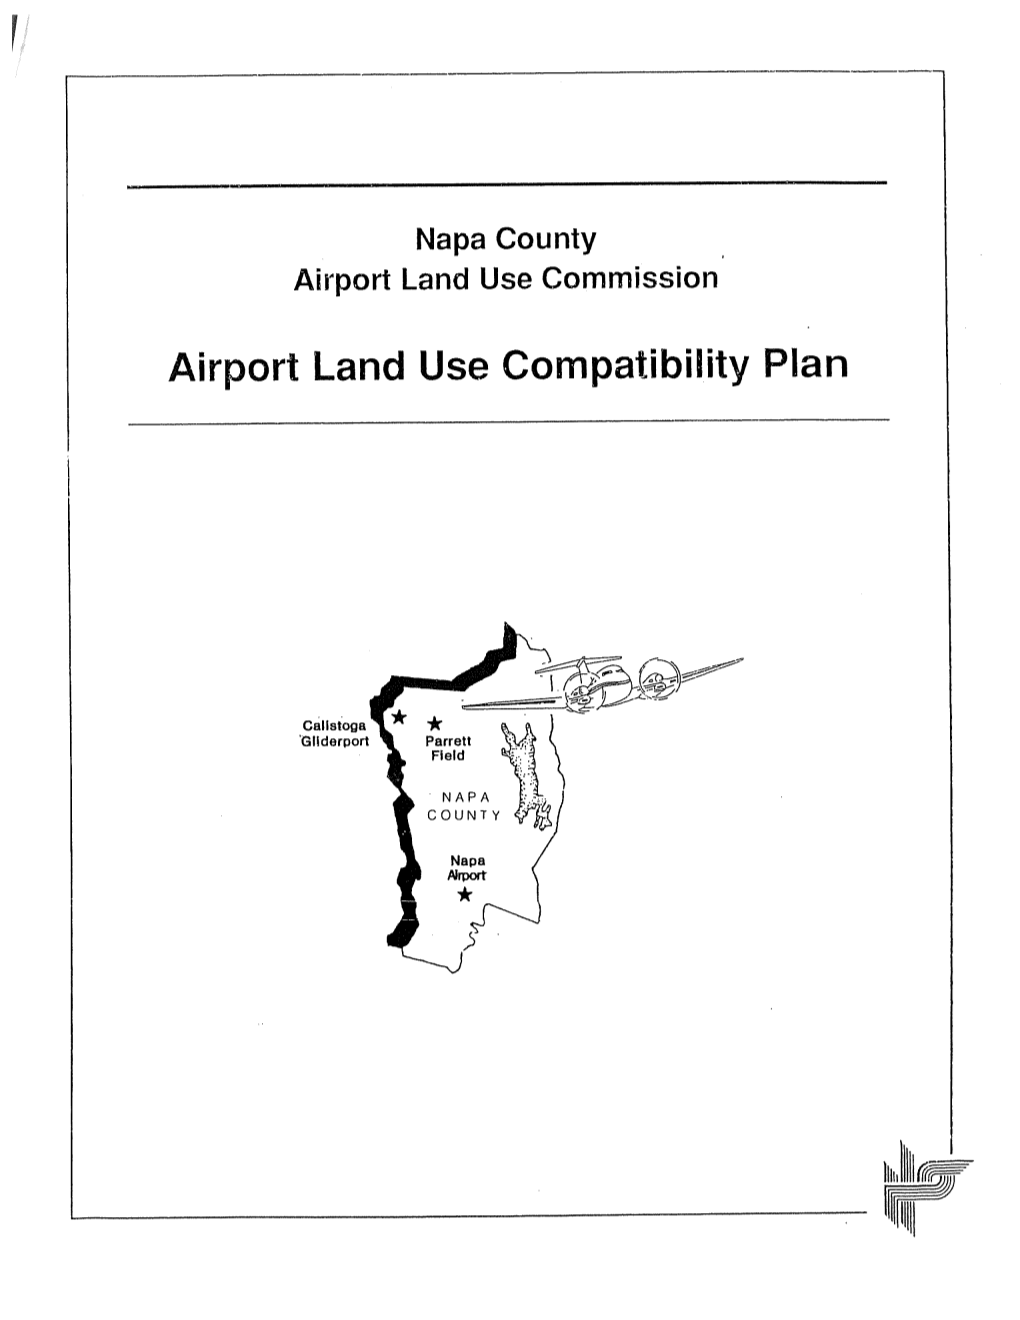 Airport Land Use Compatibility Plan